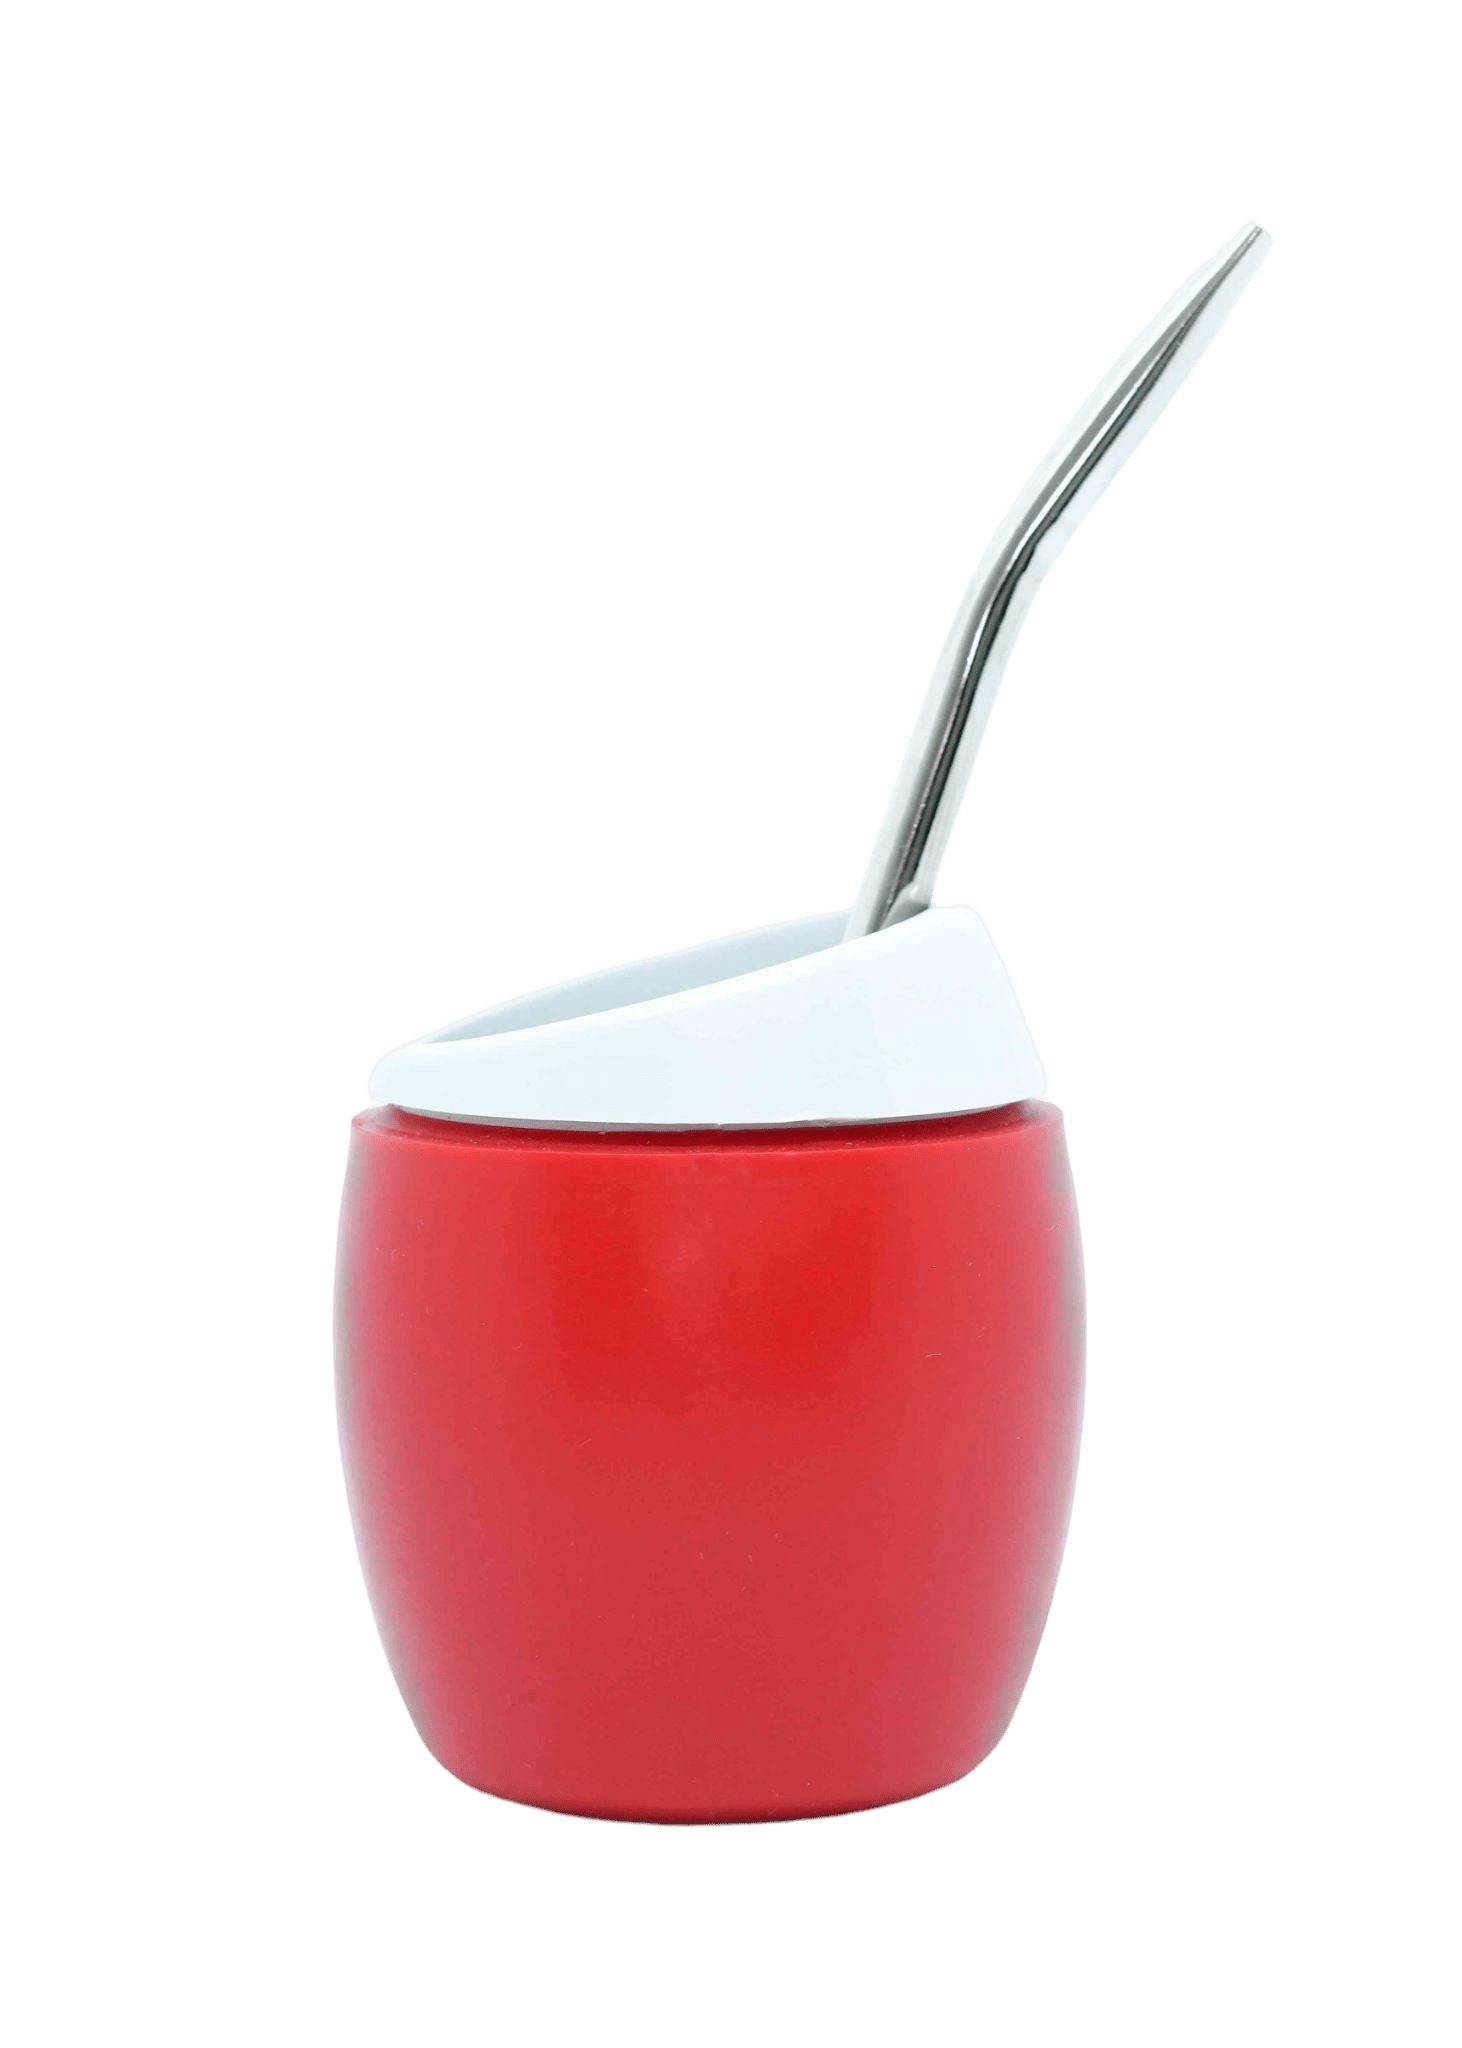 Nelo Mate Gourd with Self-extracting Straw - Red (Mate and Bombilla) Mates Hispanic Pantry 